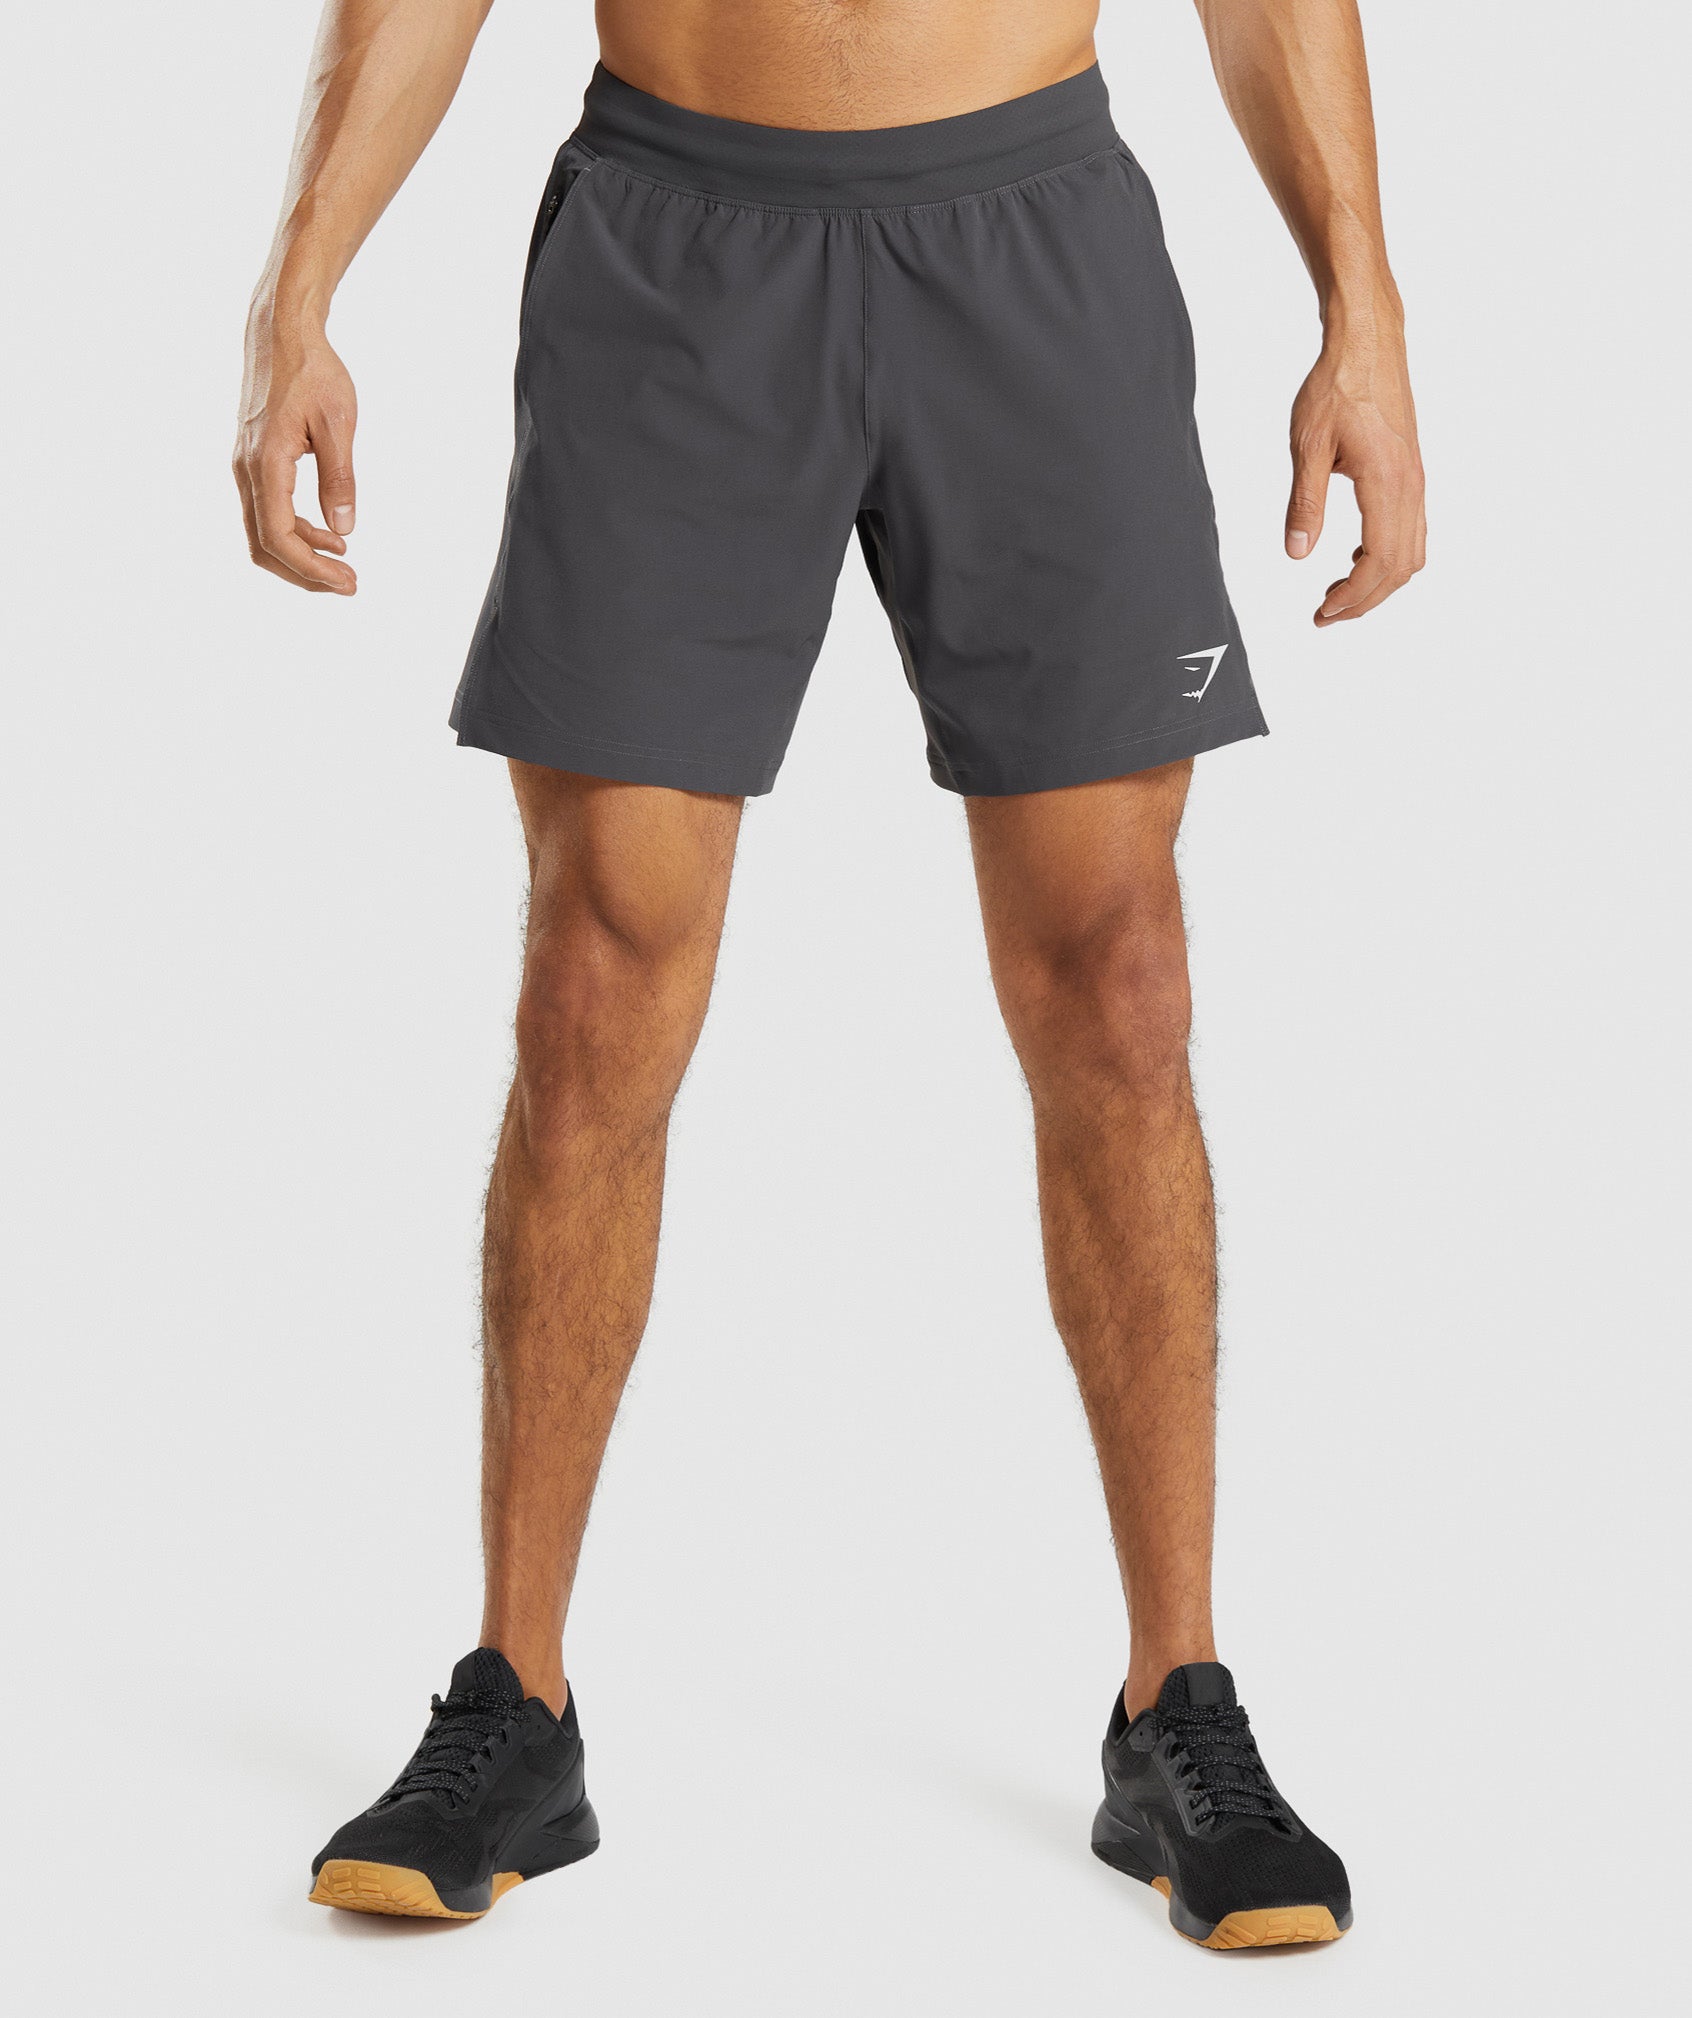 Apex 8" Function Shorts in Onyx Grey - view 2